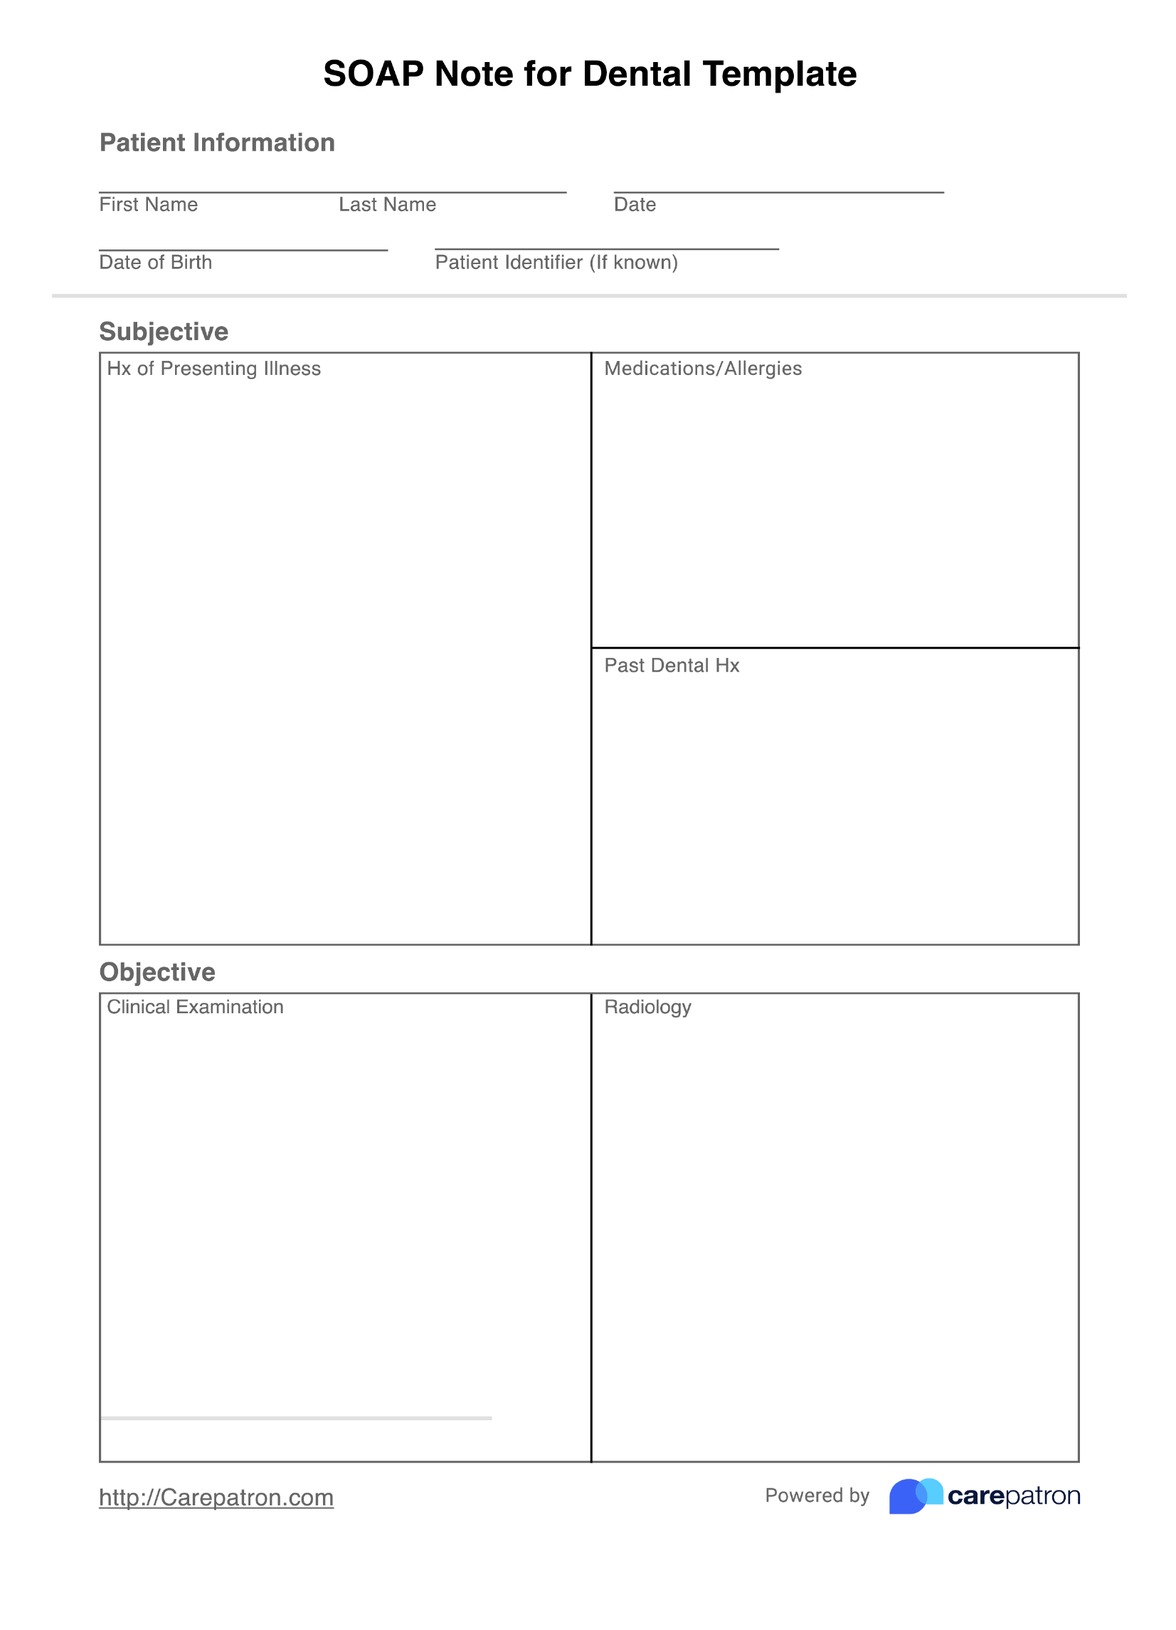 SOAP Notes for Dental Template PDF Example